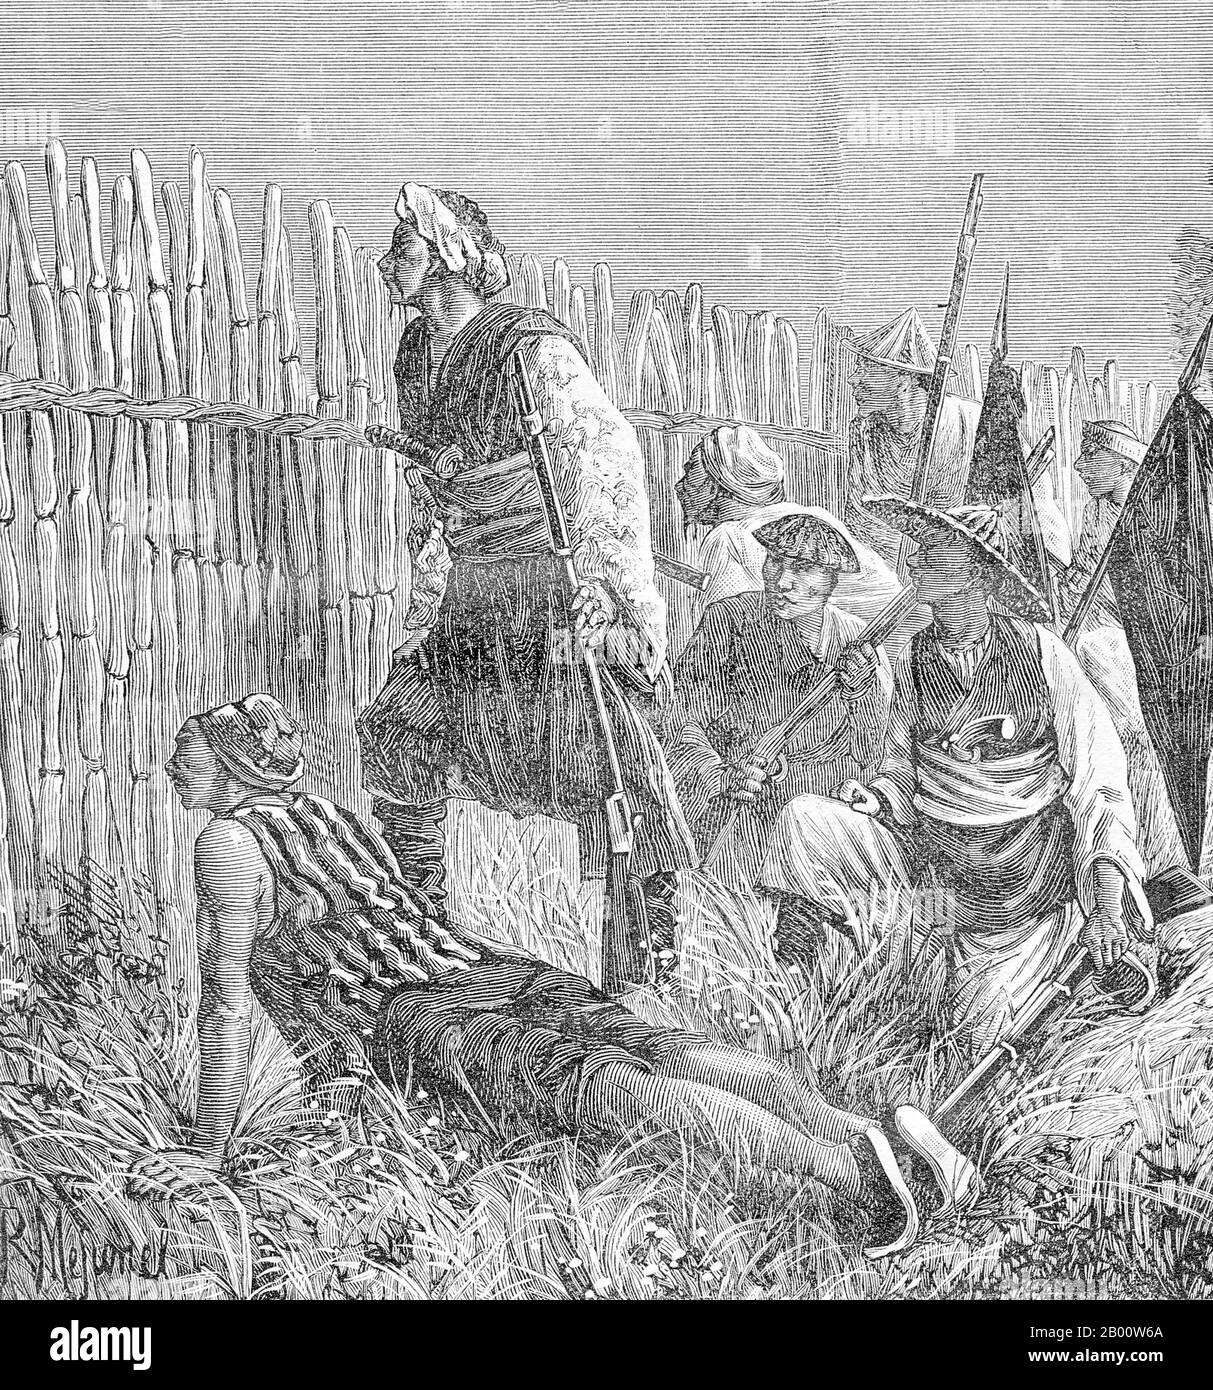 Vietnam: Black Flag soldiers lying in ambush for French colonialists in Tonkin, 1883.  The Black Flag Army (Chinese: Heiqi Jun) was a remnant of a bandit group who may have been former Taiping rebels that crossed the border from Guangxi province of China into Upper Tonkin, in the Empire of Annam (Vietnam) in 1865. They became known mainly for their fights against French forces in cooperation with both Vietnamese and Chinese authorities. The Black Flag Army is so named because of the preference of its commander, Liu Yongfu, for using black command flags. Stock Photo